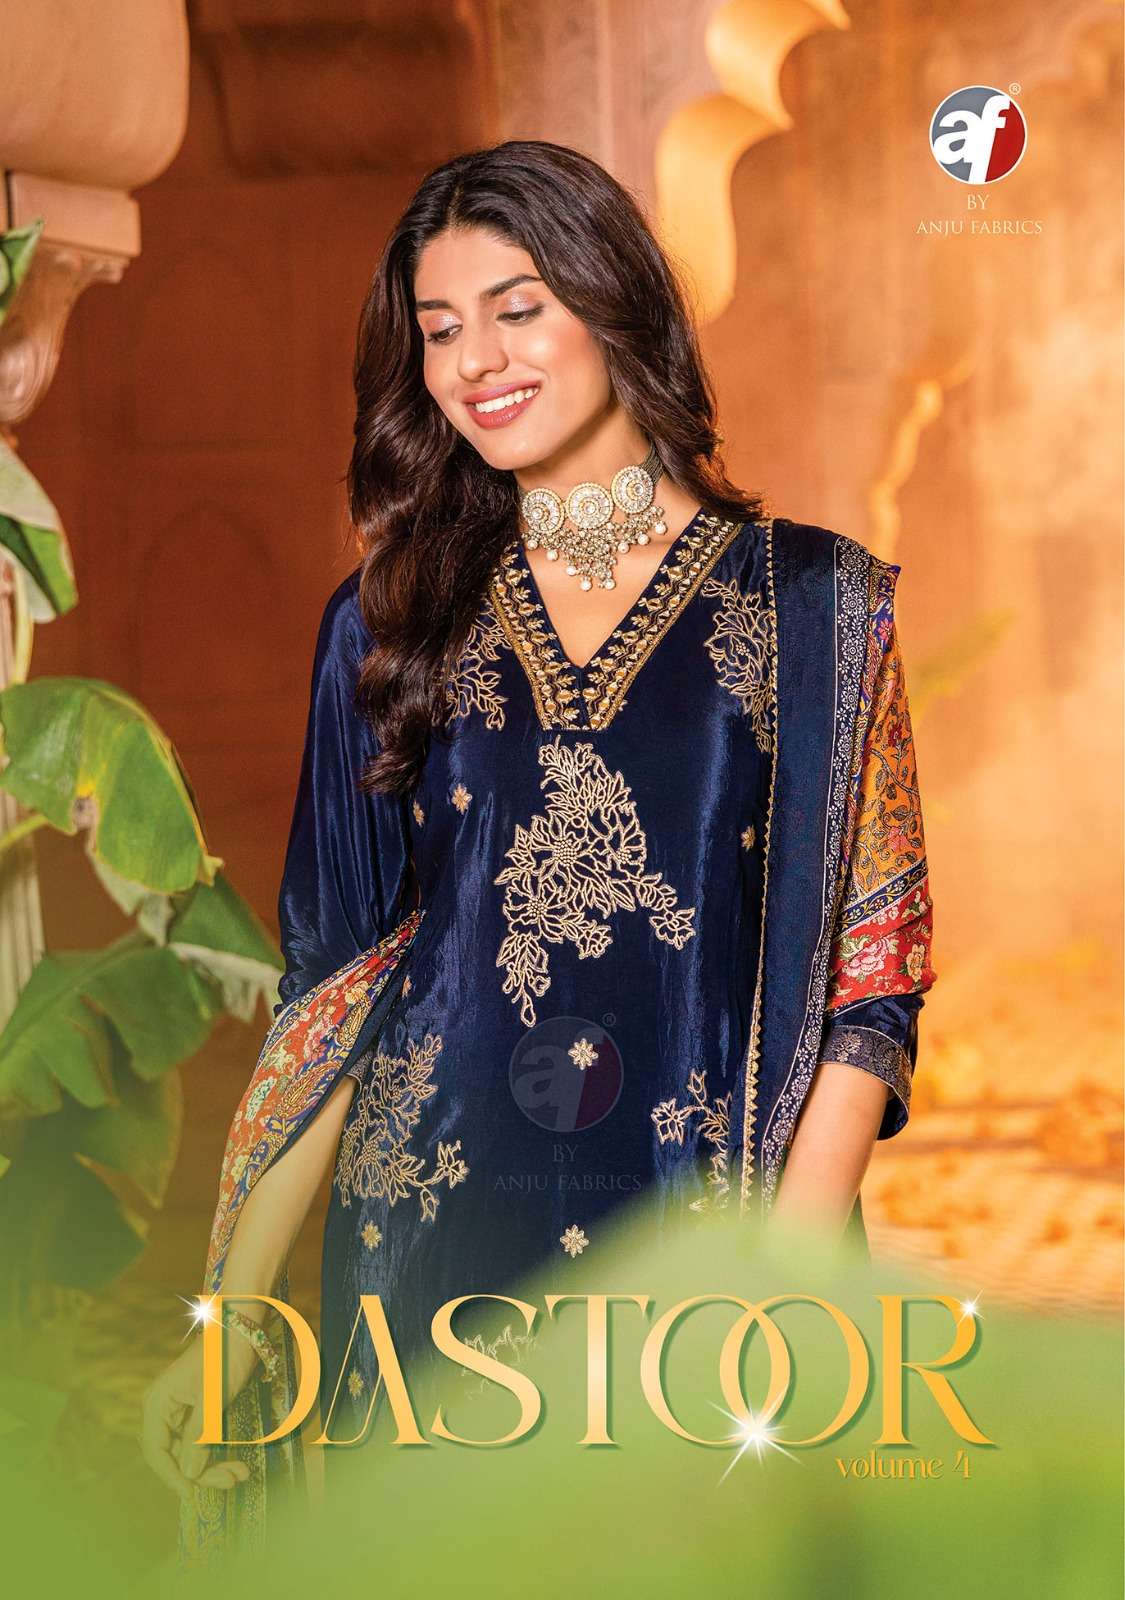 ANJU FABRICS STOCK OUT DASTOOR VOL 4 NEW HEAVY FANCY DESIGNER PURE NATURAL CRAPE WITH JACQUARD HAND WORK KURTI PENT WITH DUPATTA FESTIVAL WEAR COLLECTION WHOLESALER